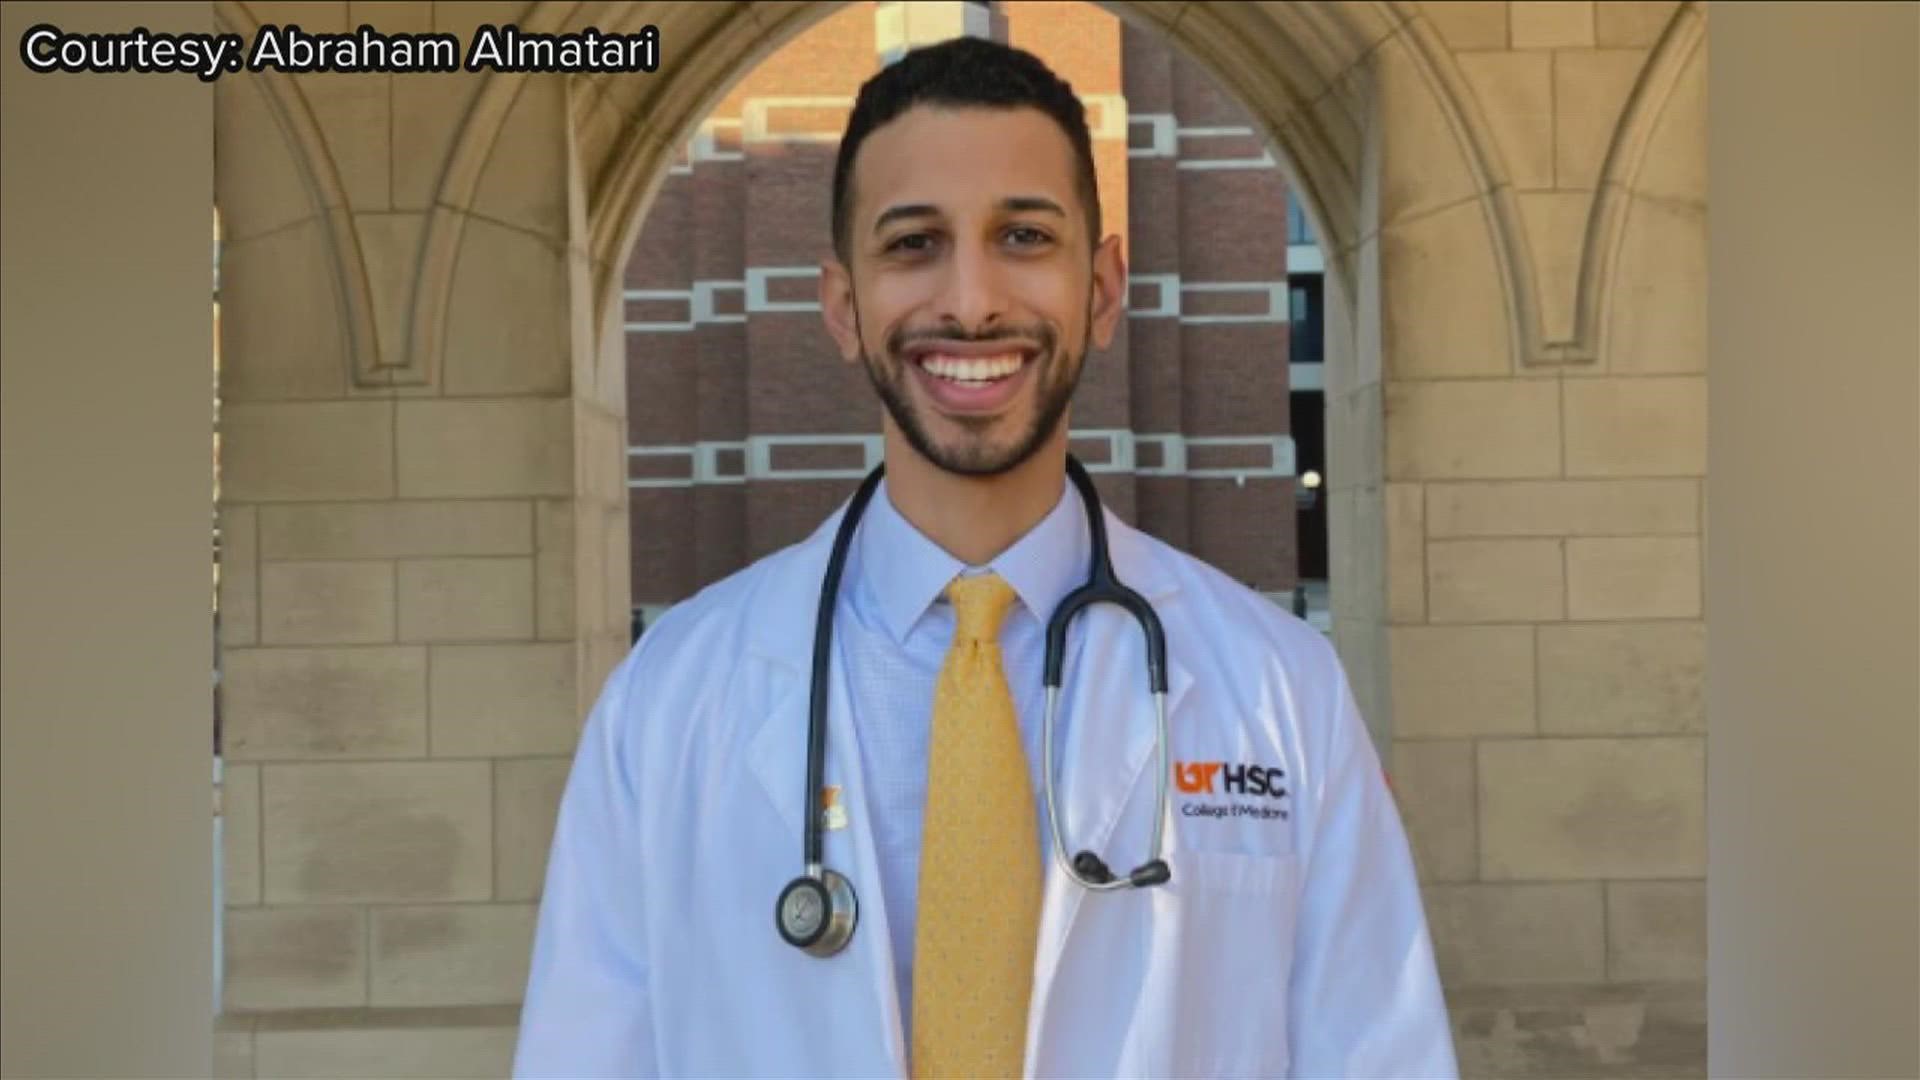 UTHSC student Abraham Almatari discovered a mass on his kidney in an ultrasound lab during his first semester of medical school.